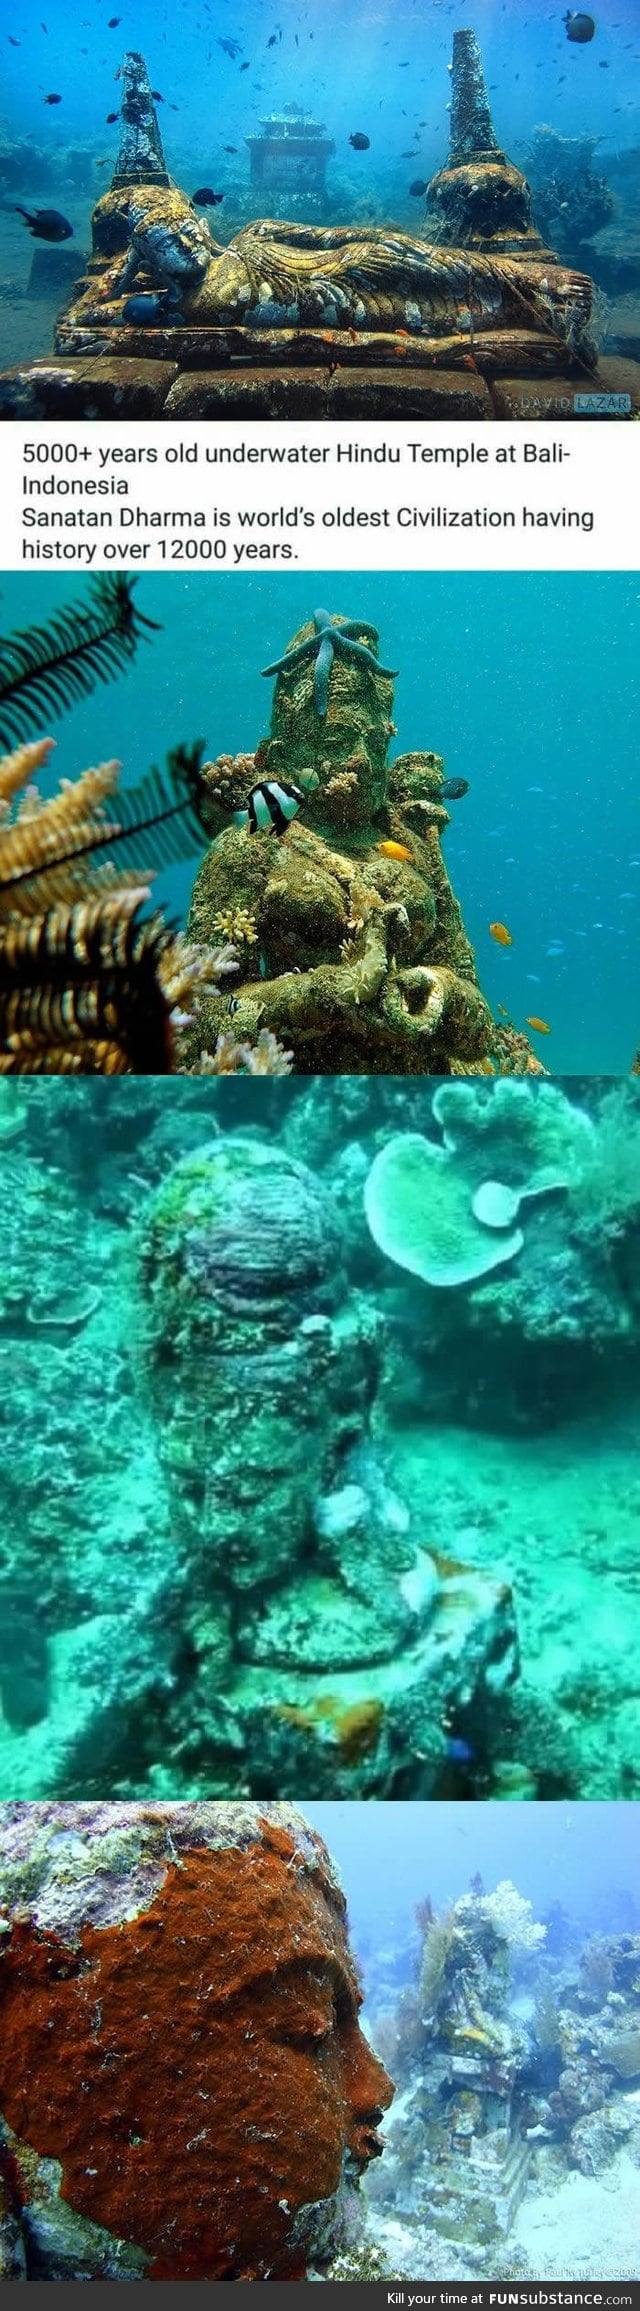 5000+ years old Hindu temple was found under water